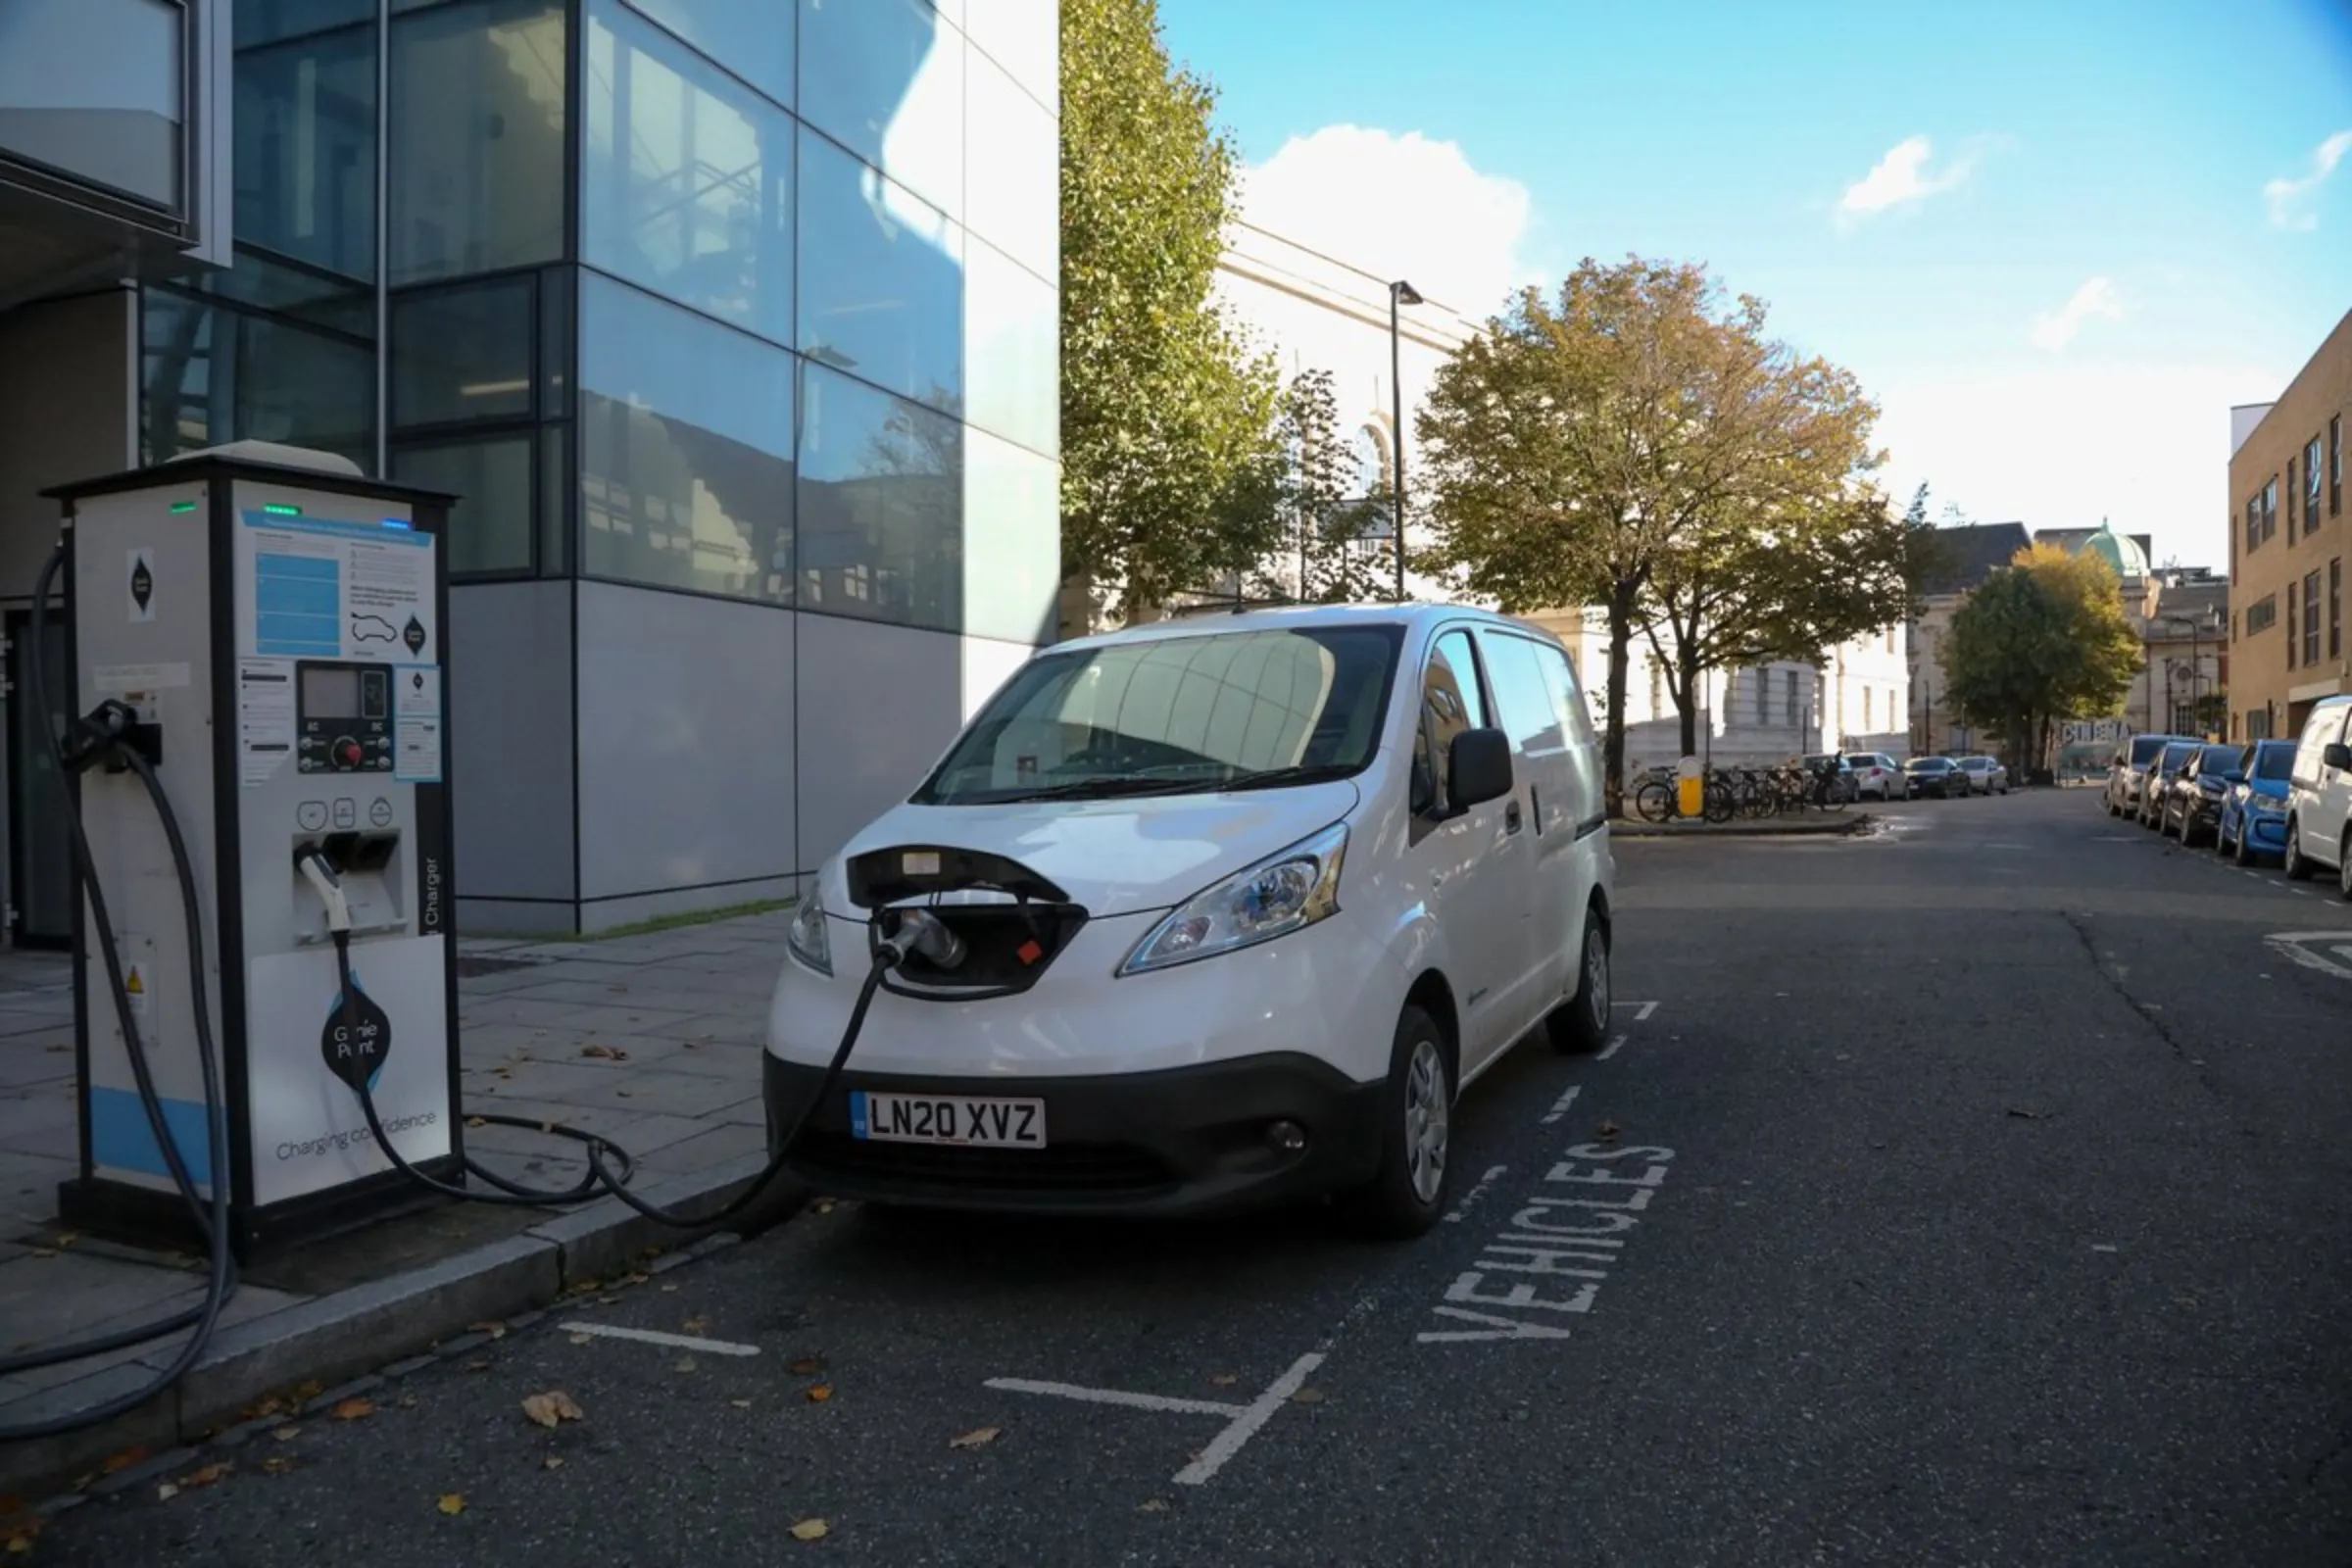 An electric van charges outside Hackney Service Centre in London, England, on October 21, 2021